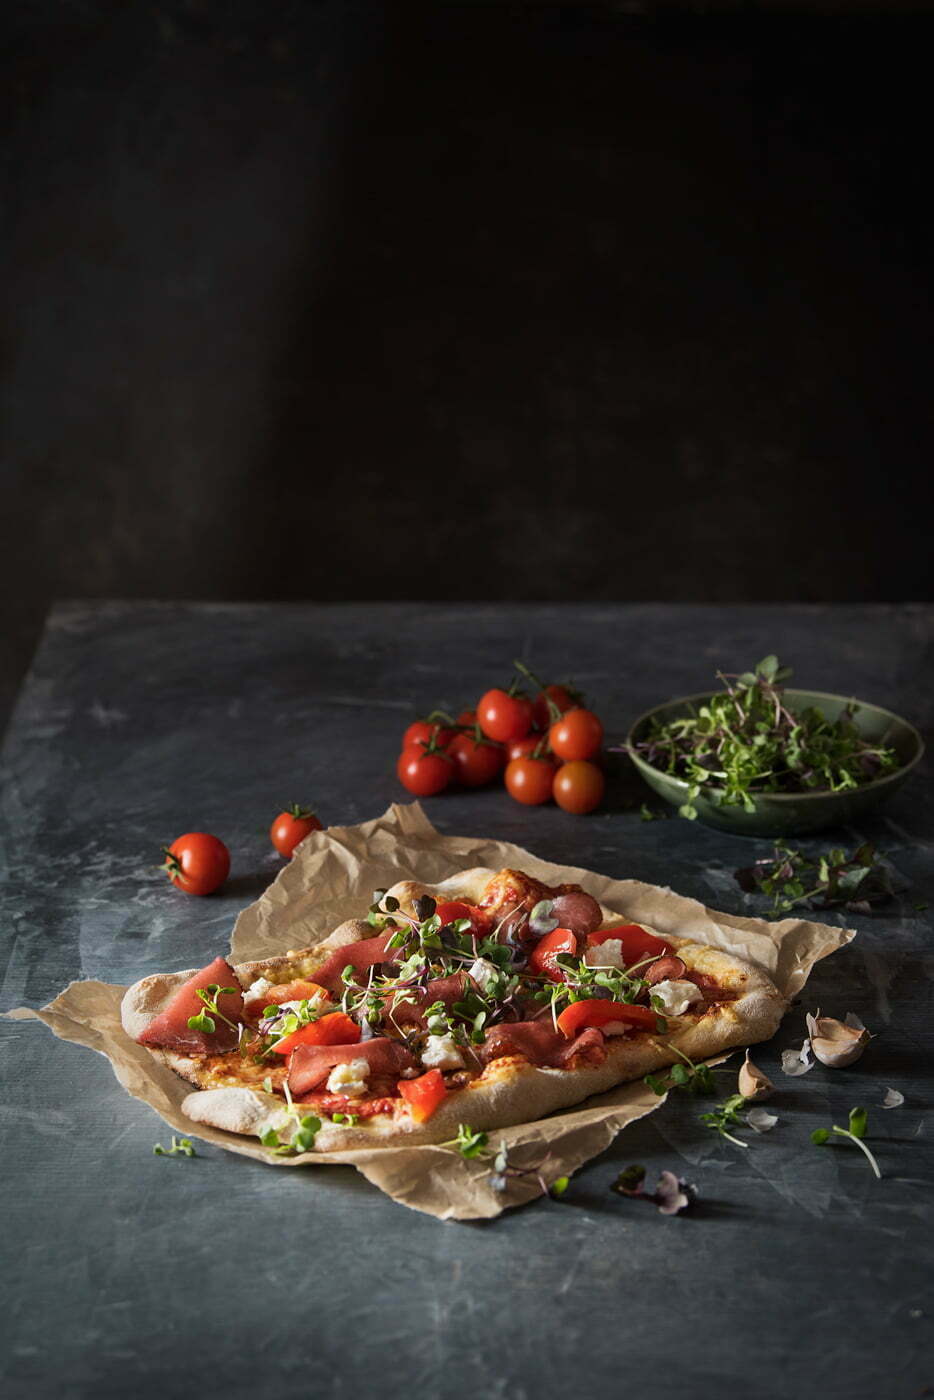 Freshly_baked_pizza_with_fresh_tomatoes_and_ham_on_a_dark_and_moody_background